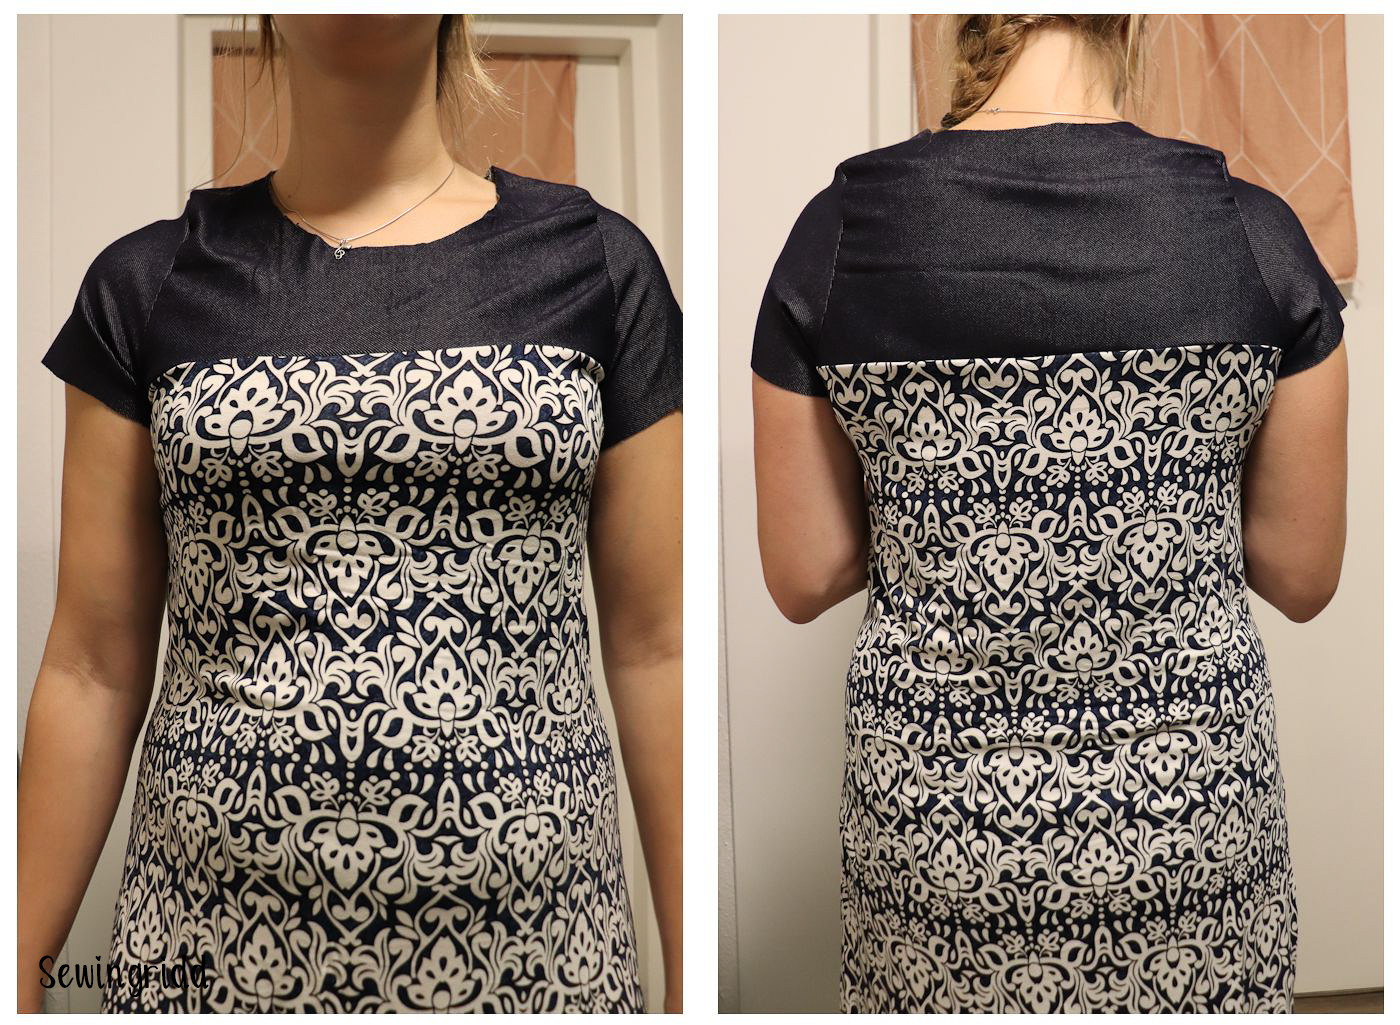 Maple T-shirt Dress from Petite Stitchery & co sewn by Sewingridd